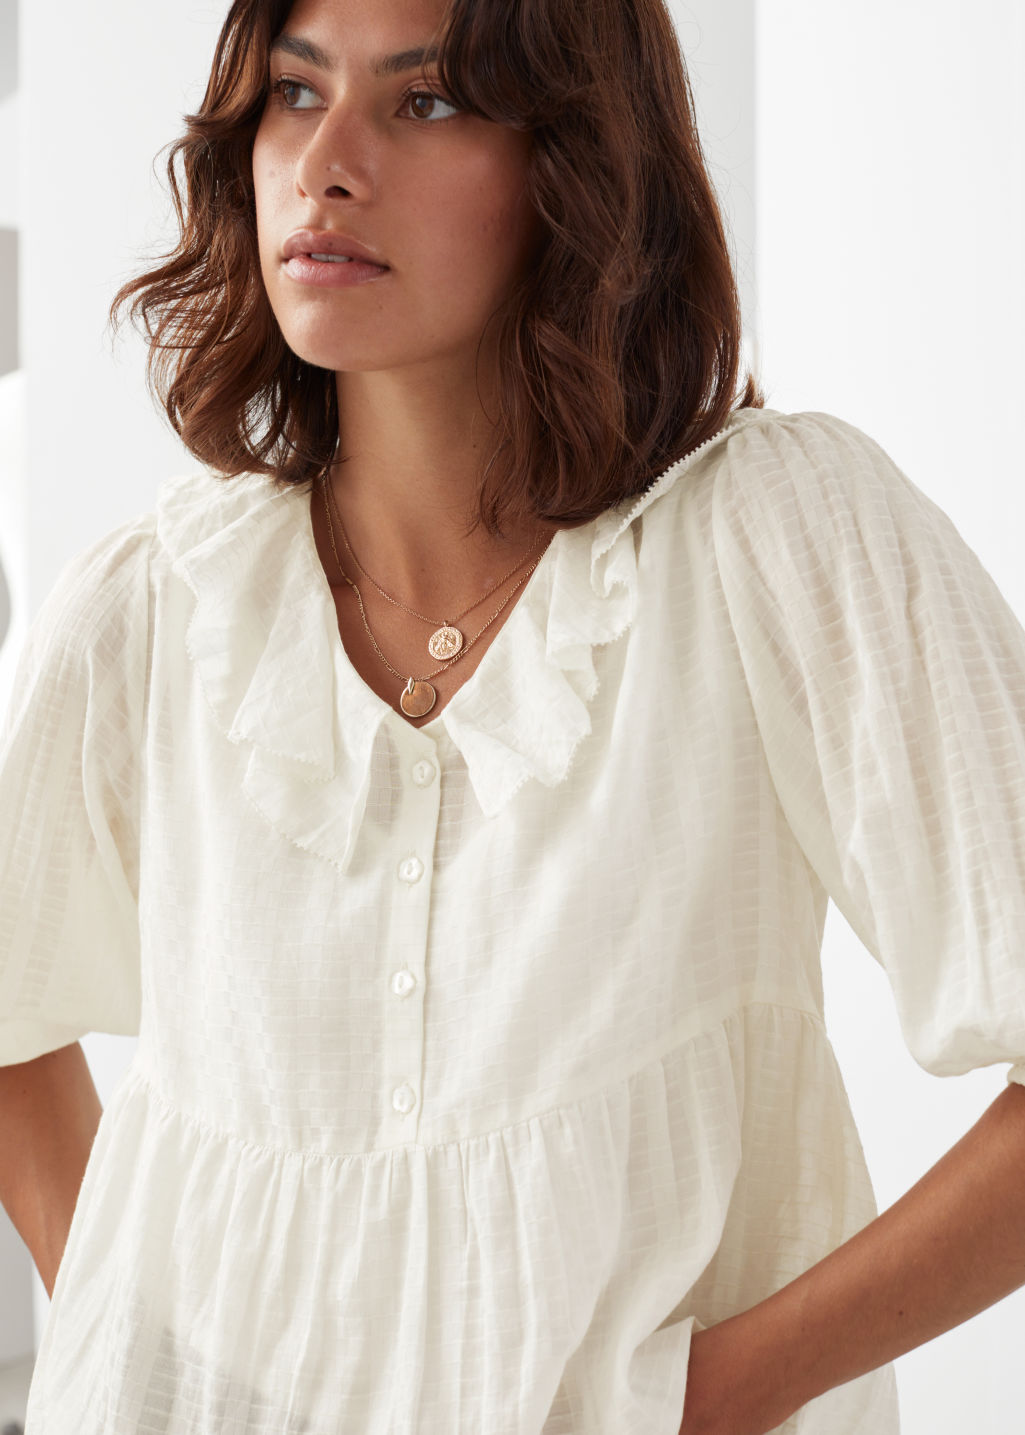 Relaxed Ruffle Collar Top - White - Tops & T-shirts - & Other Stories